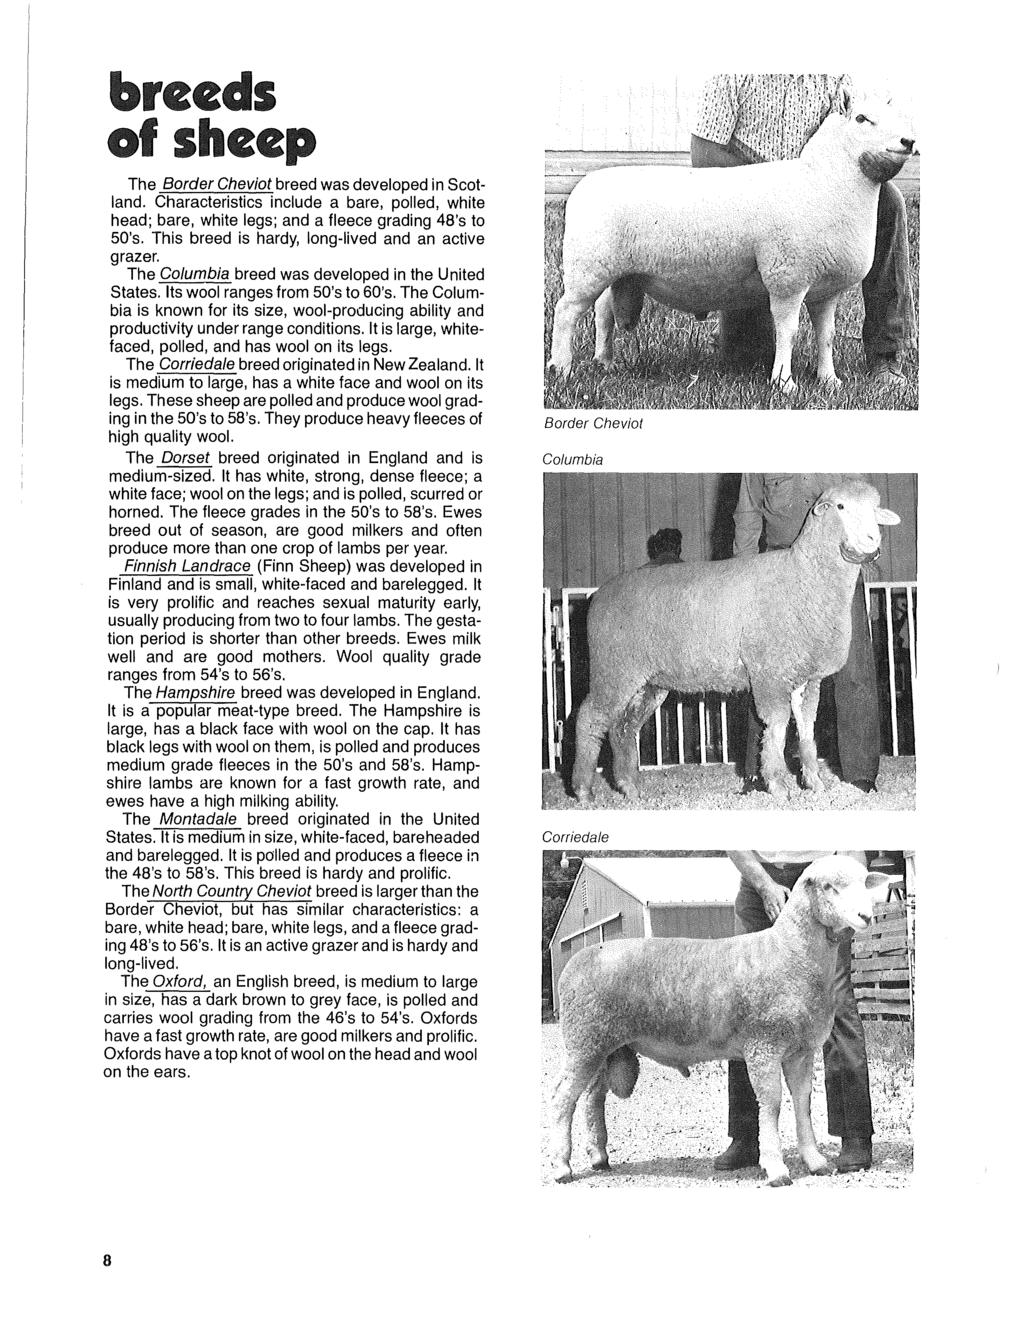 reeas ~f shee The Border Cheviot breed was developed in Scotland. Characteristics include a bare, polled, white head; bare, white legs; and a fleece grading 48's to 50's.